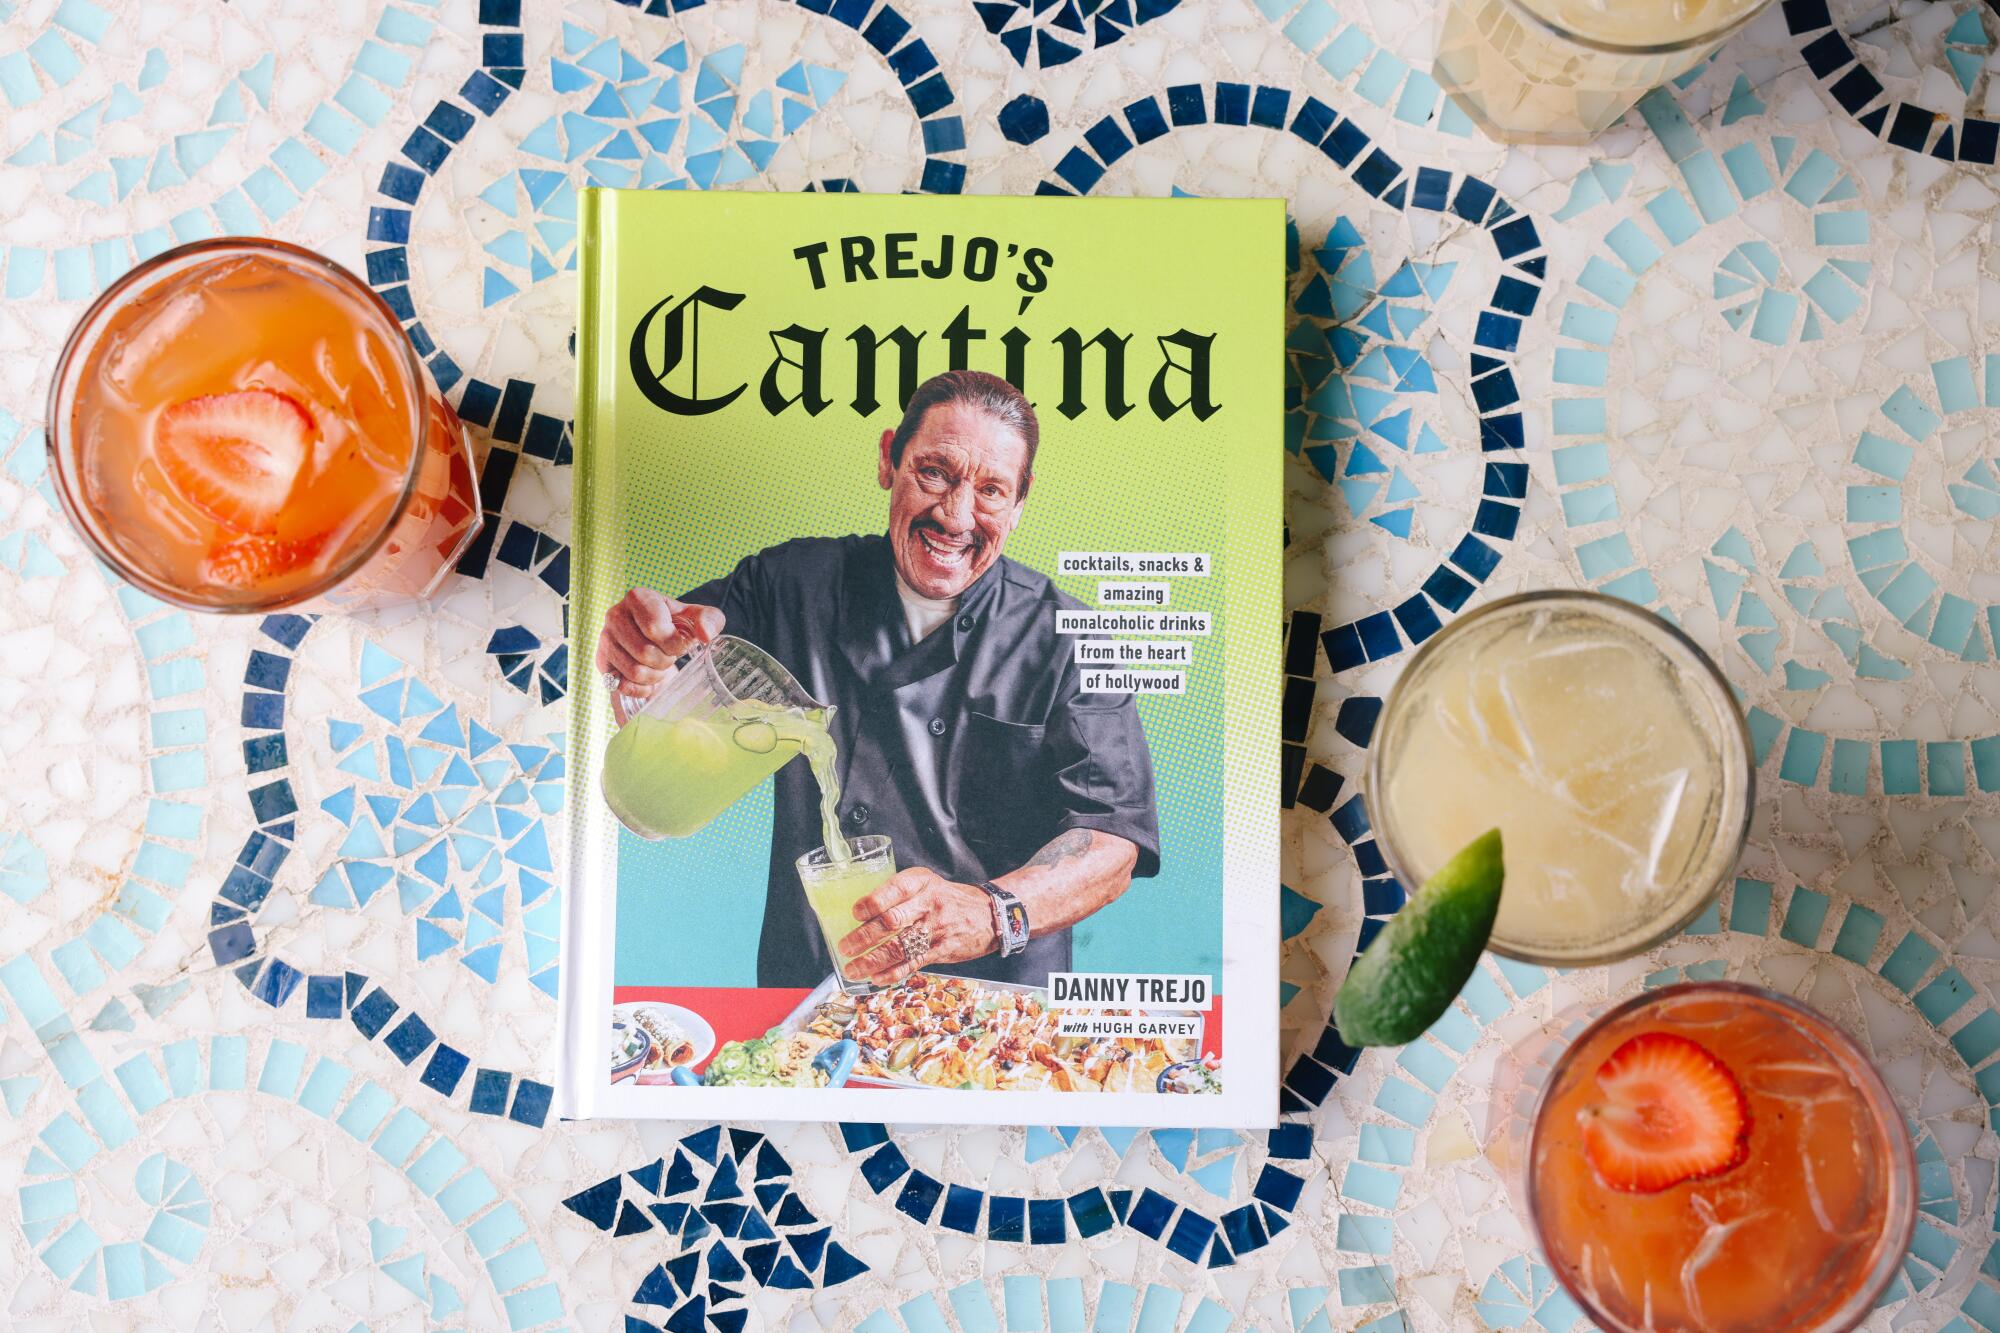 The "Trejo's Cantina" cookbook on a table surrounded by nonalcoholic beverages in glasses